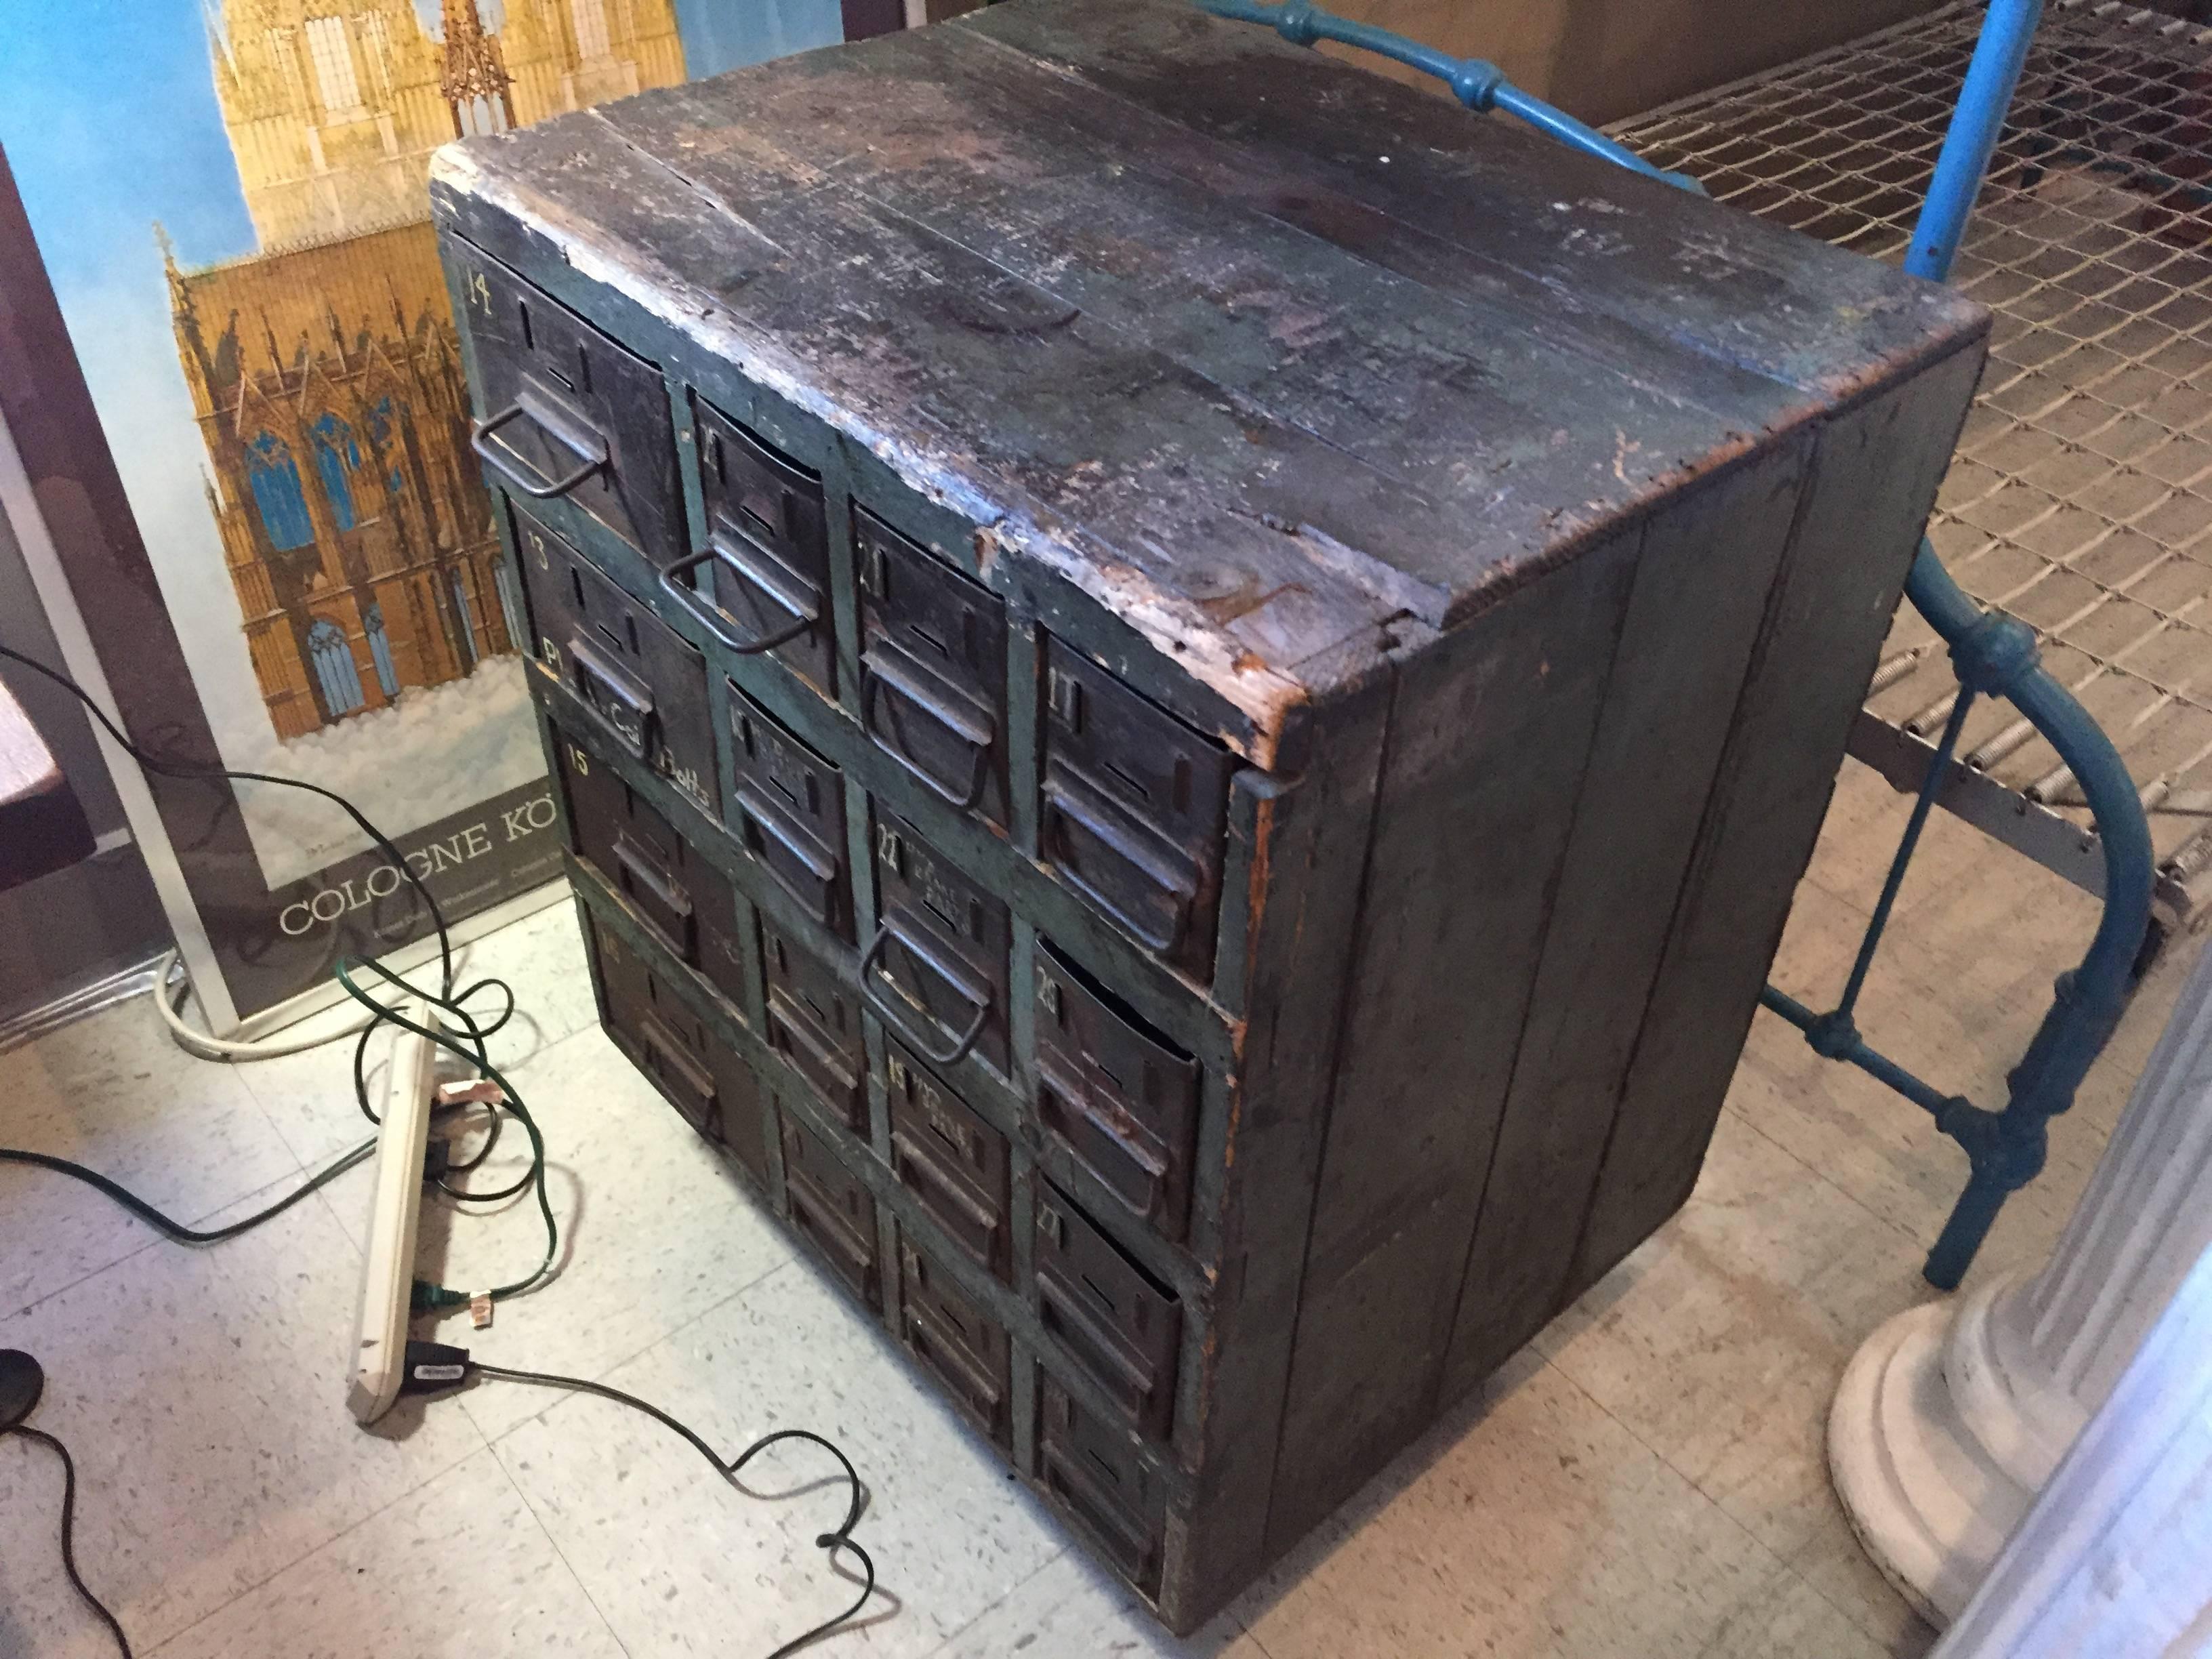 Industrial multi drawer cabinet for old automobile parts, circa 1930s-1940s. Original green paint. Great hand-painted labels on the metal drawers.